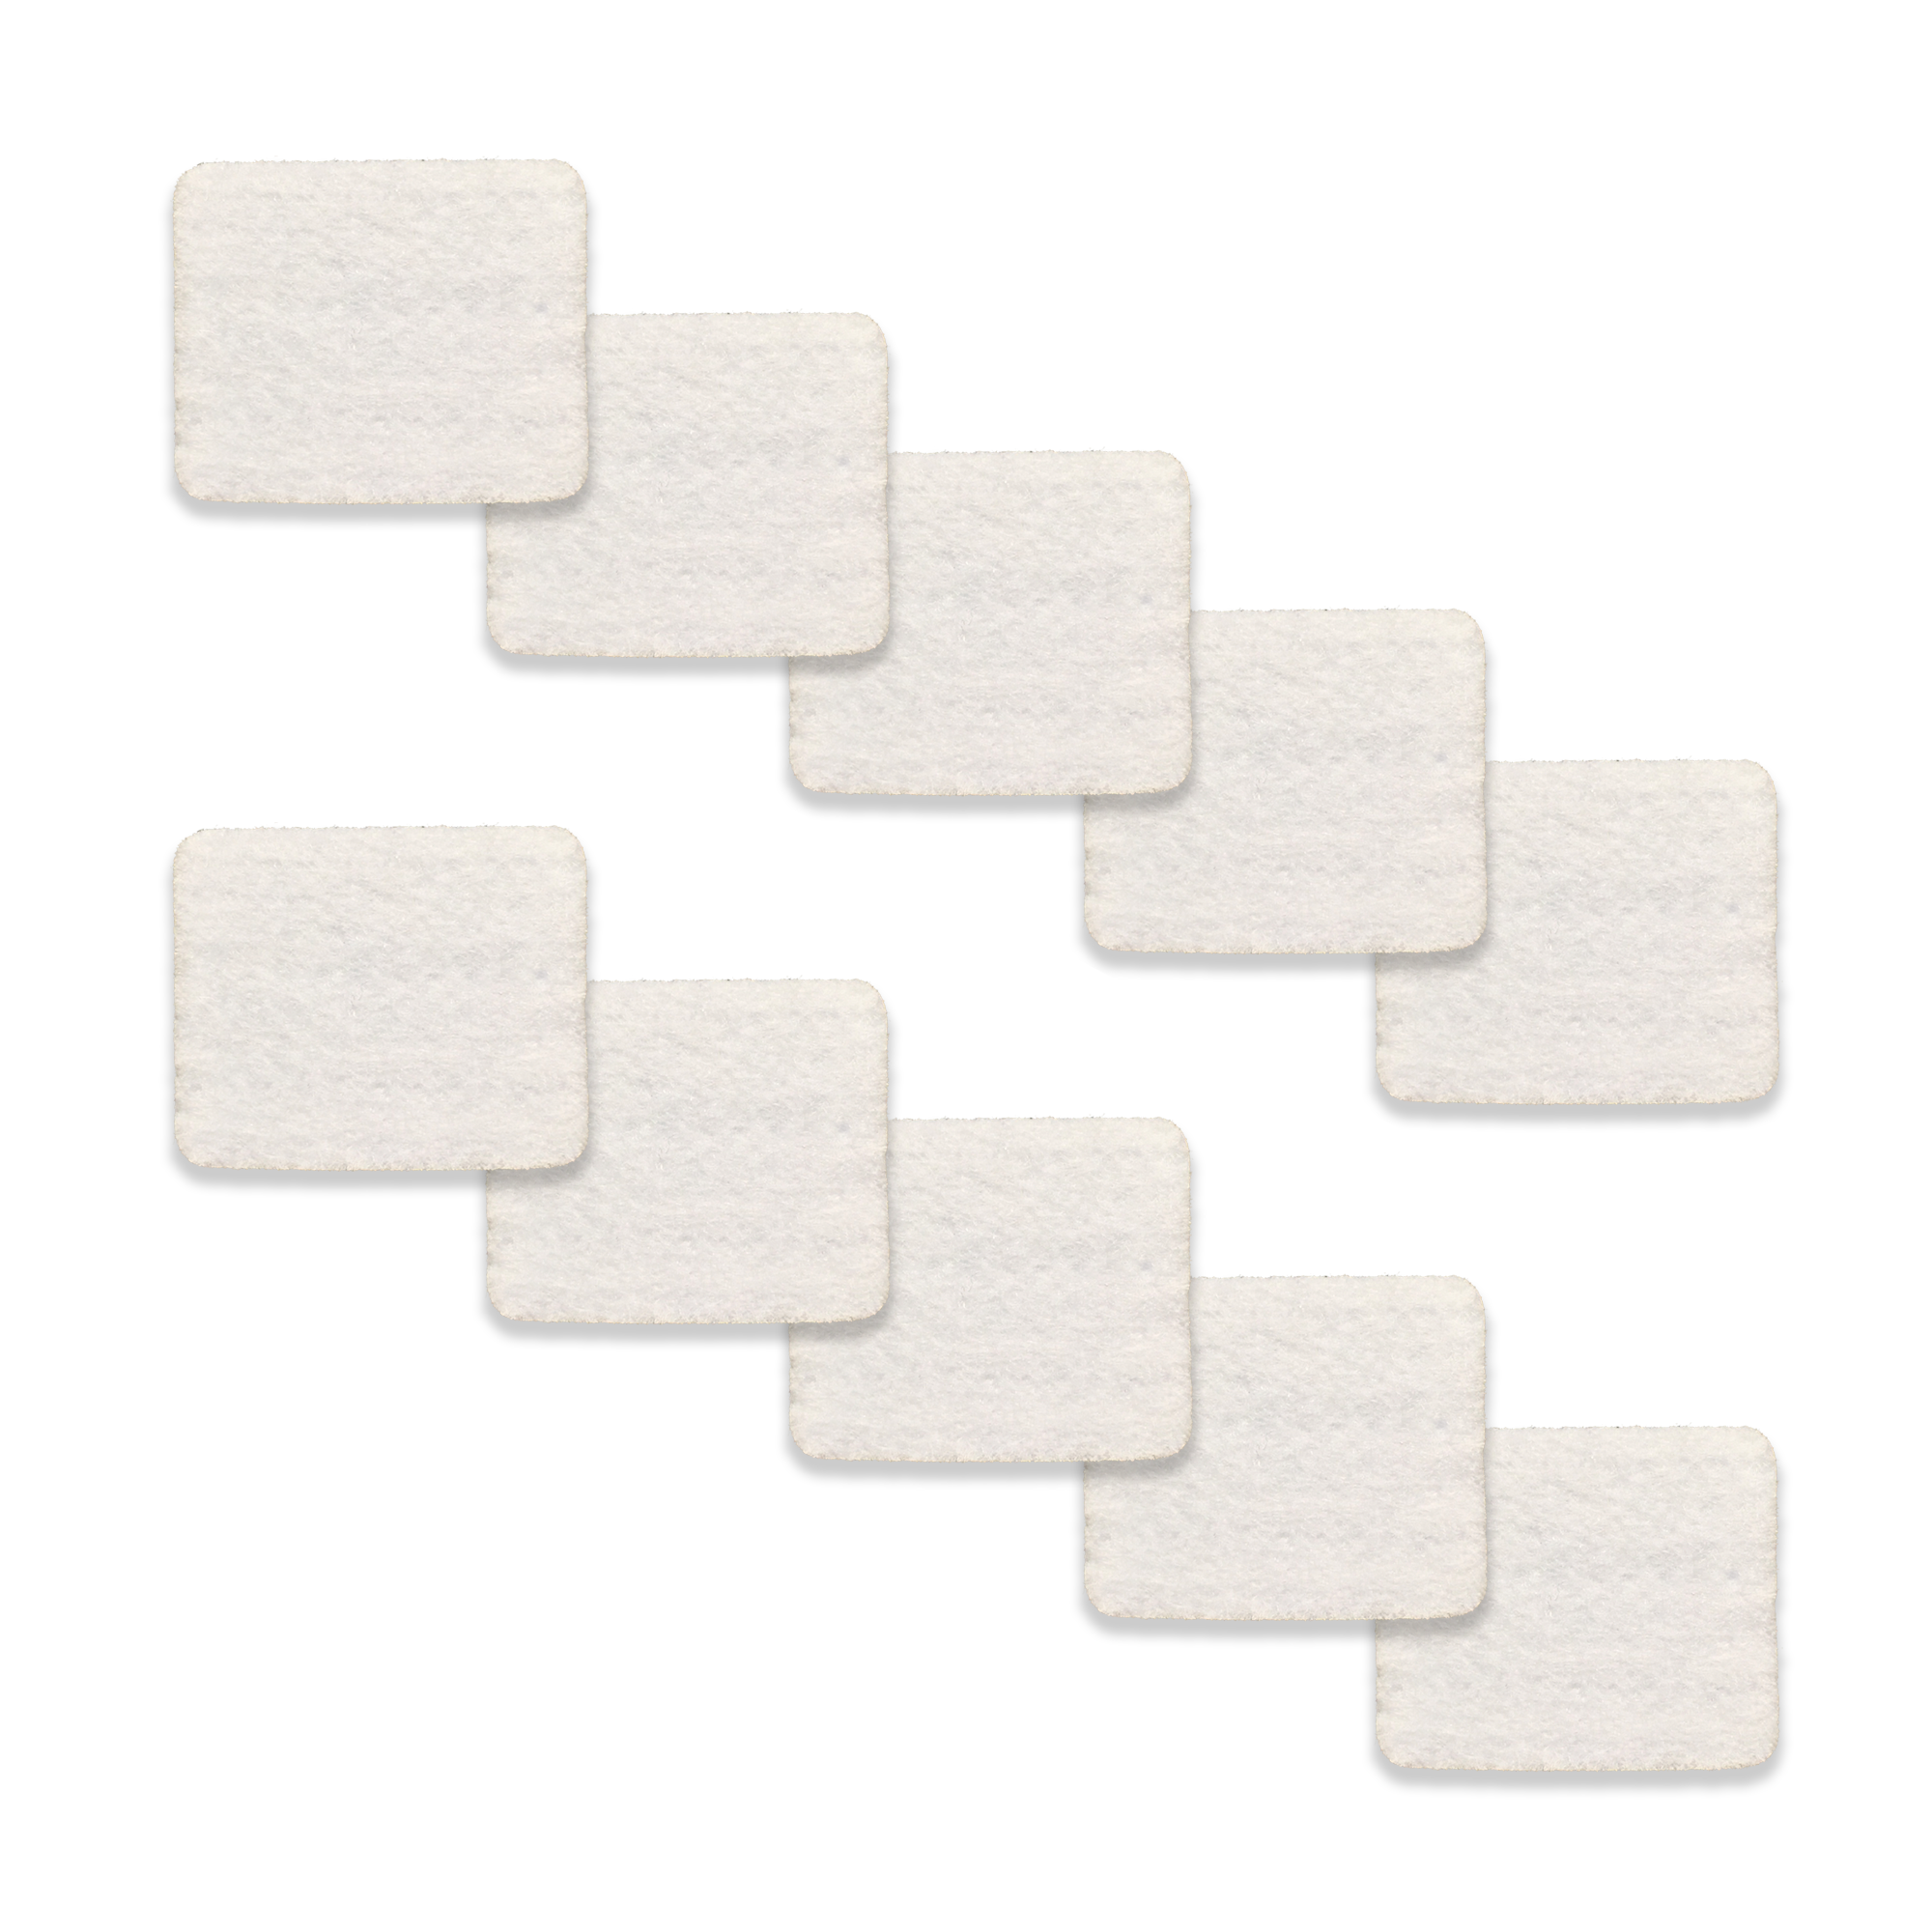 CPAP Infusion Refill Pads - 10 Refill Pads